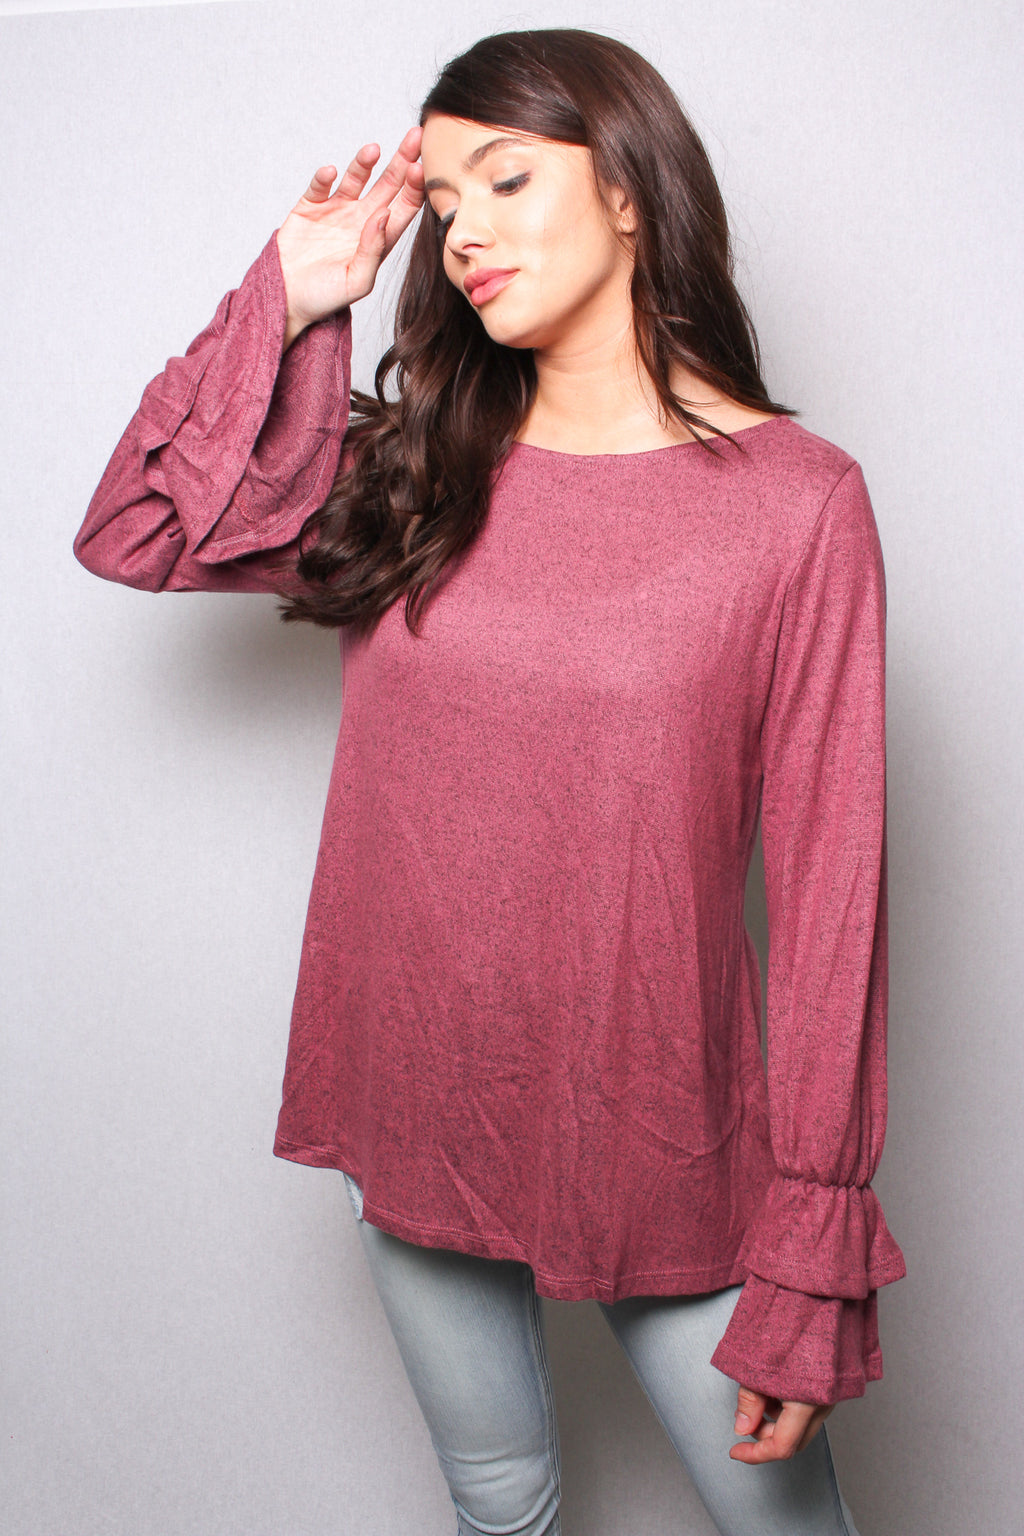 Women's Round Neck Ruffle Long Sleeves Knit Heather Top